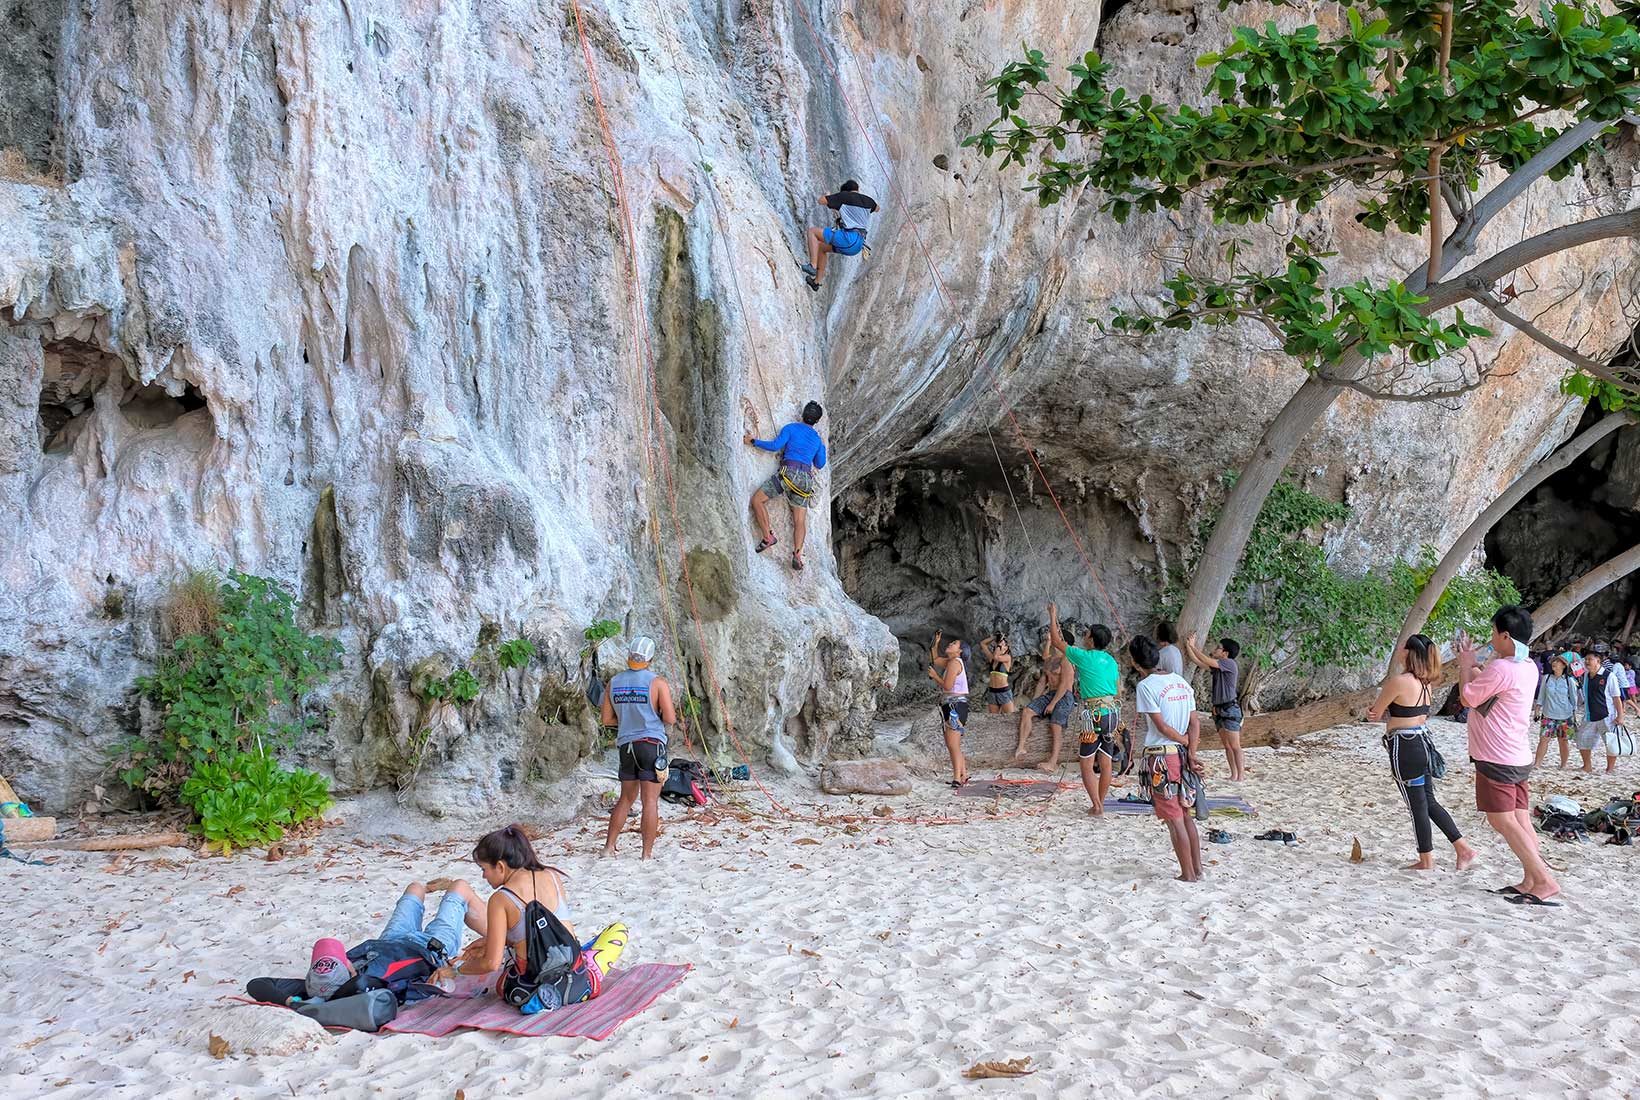 Rock climbers tackle the challenging limestone towers on the eastern side of Railay Beach